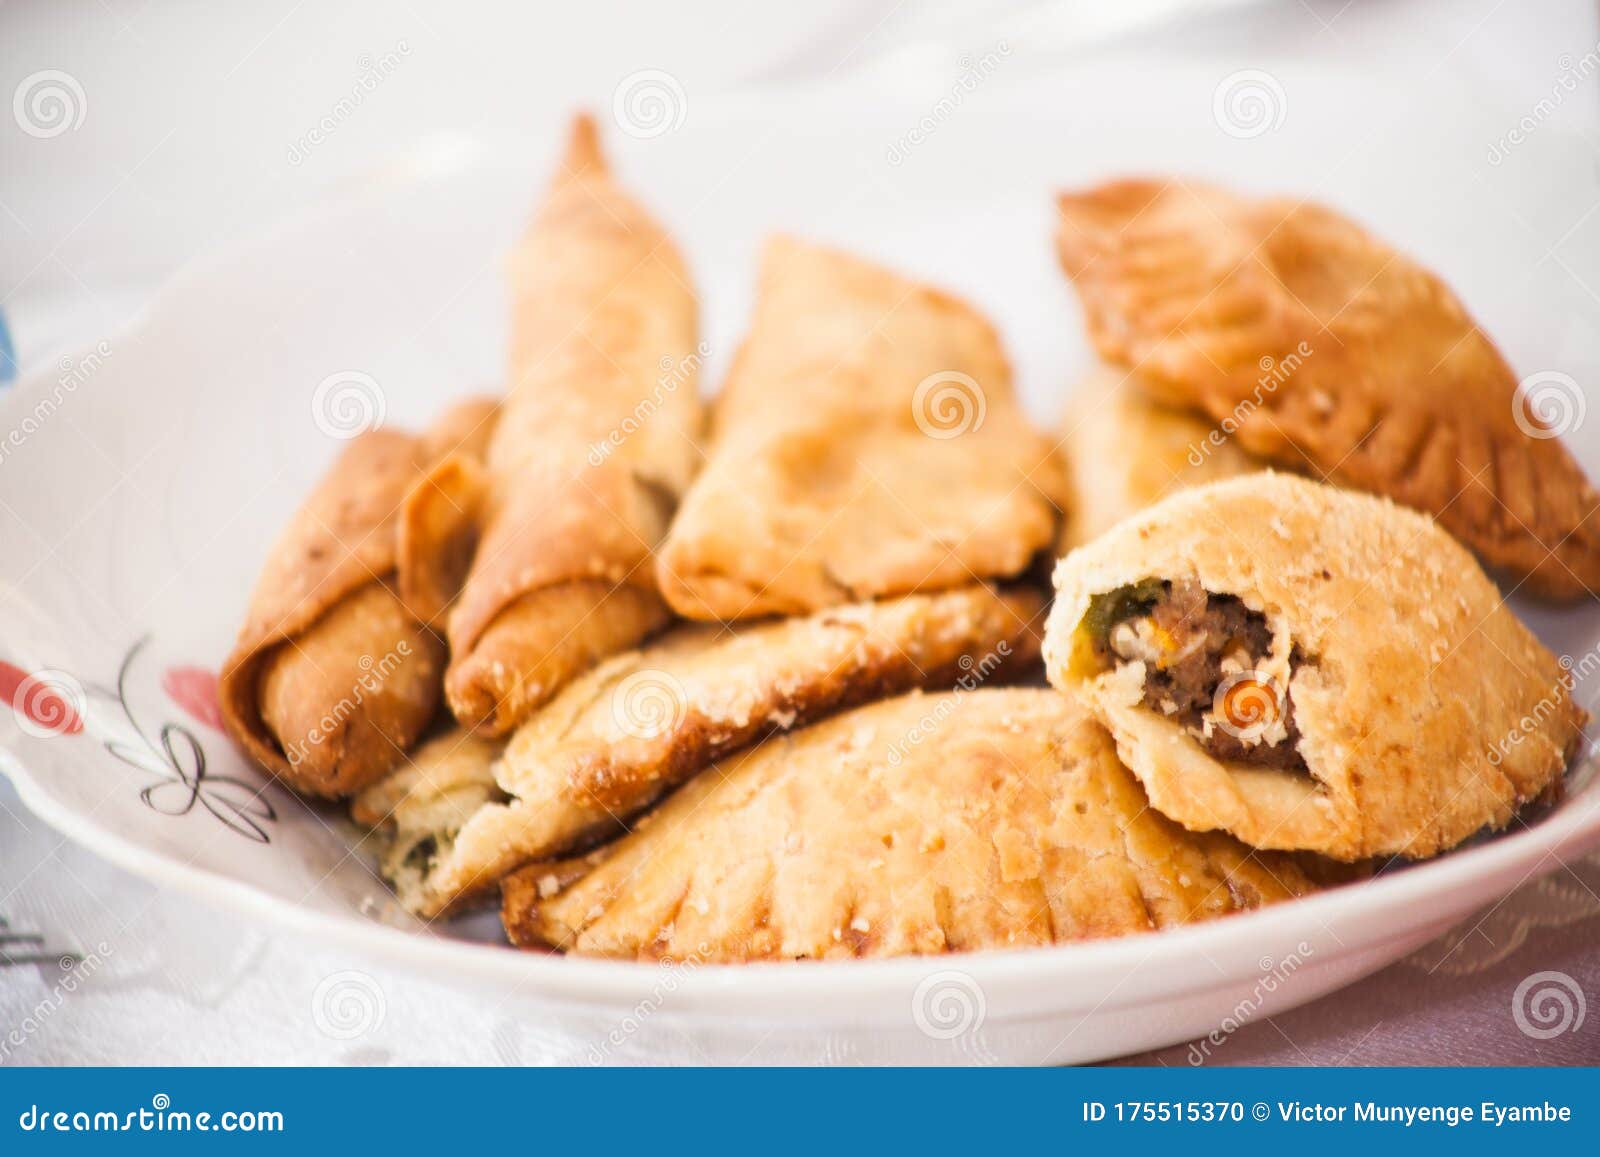 Meat pie the Cameroon way. stock photo. Image of douala - 175515370